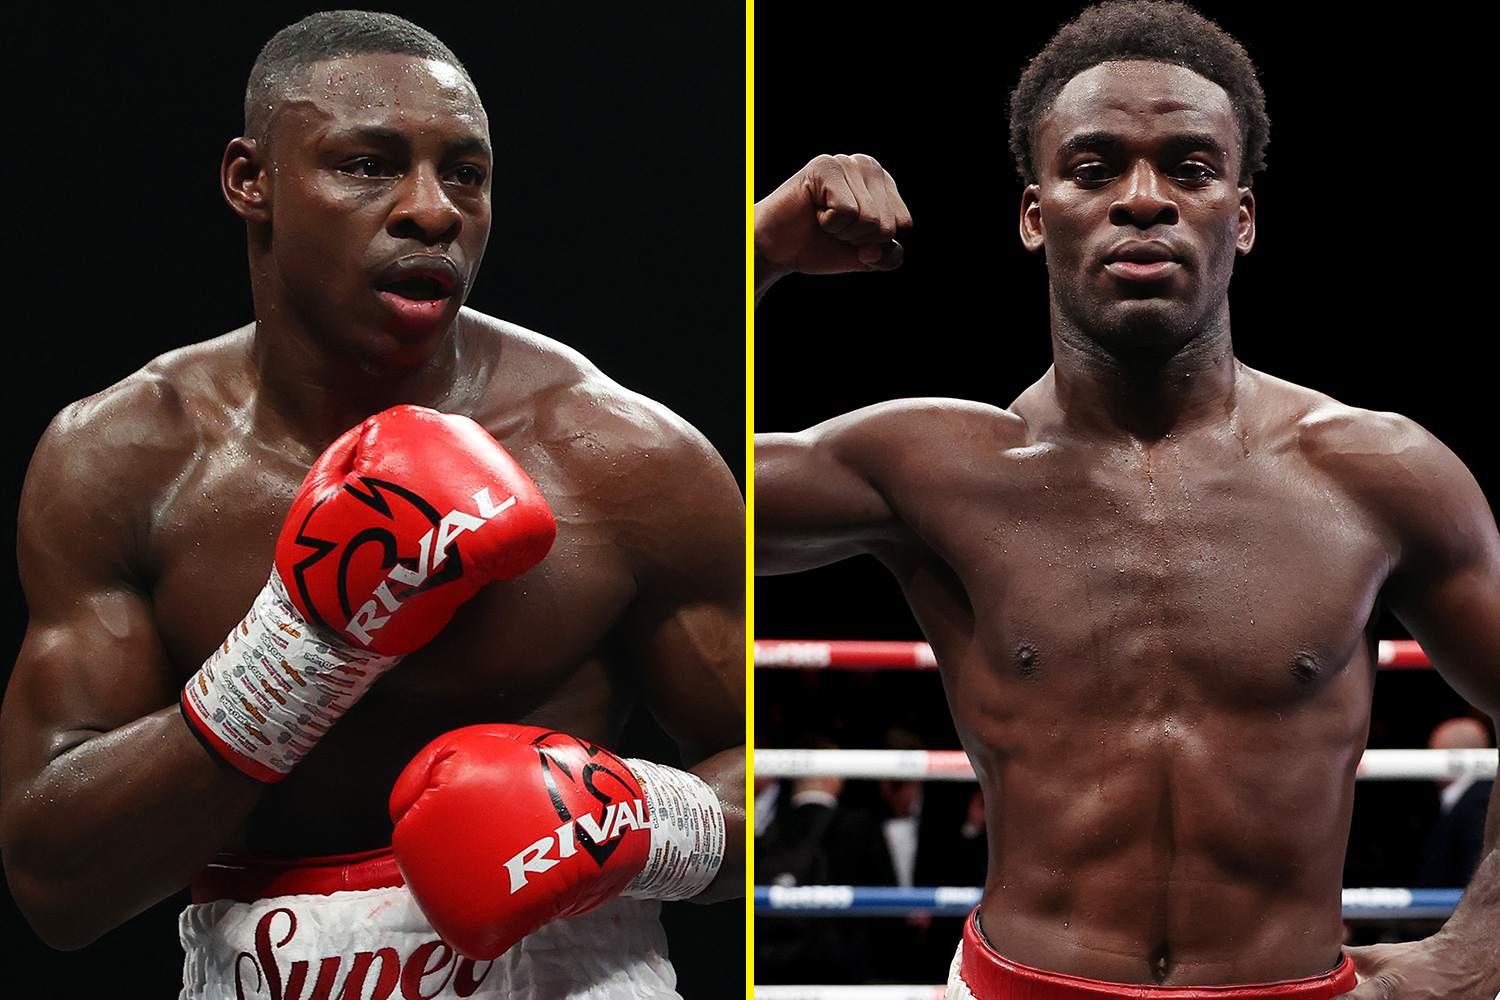 WBA Qualifier Fight Between Buatsi And Azeez To Take Place On February 3 In London